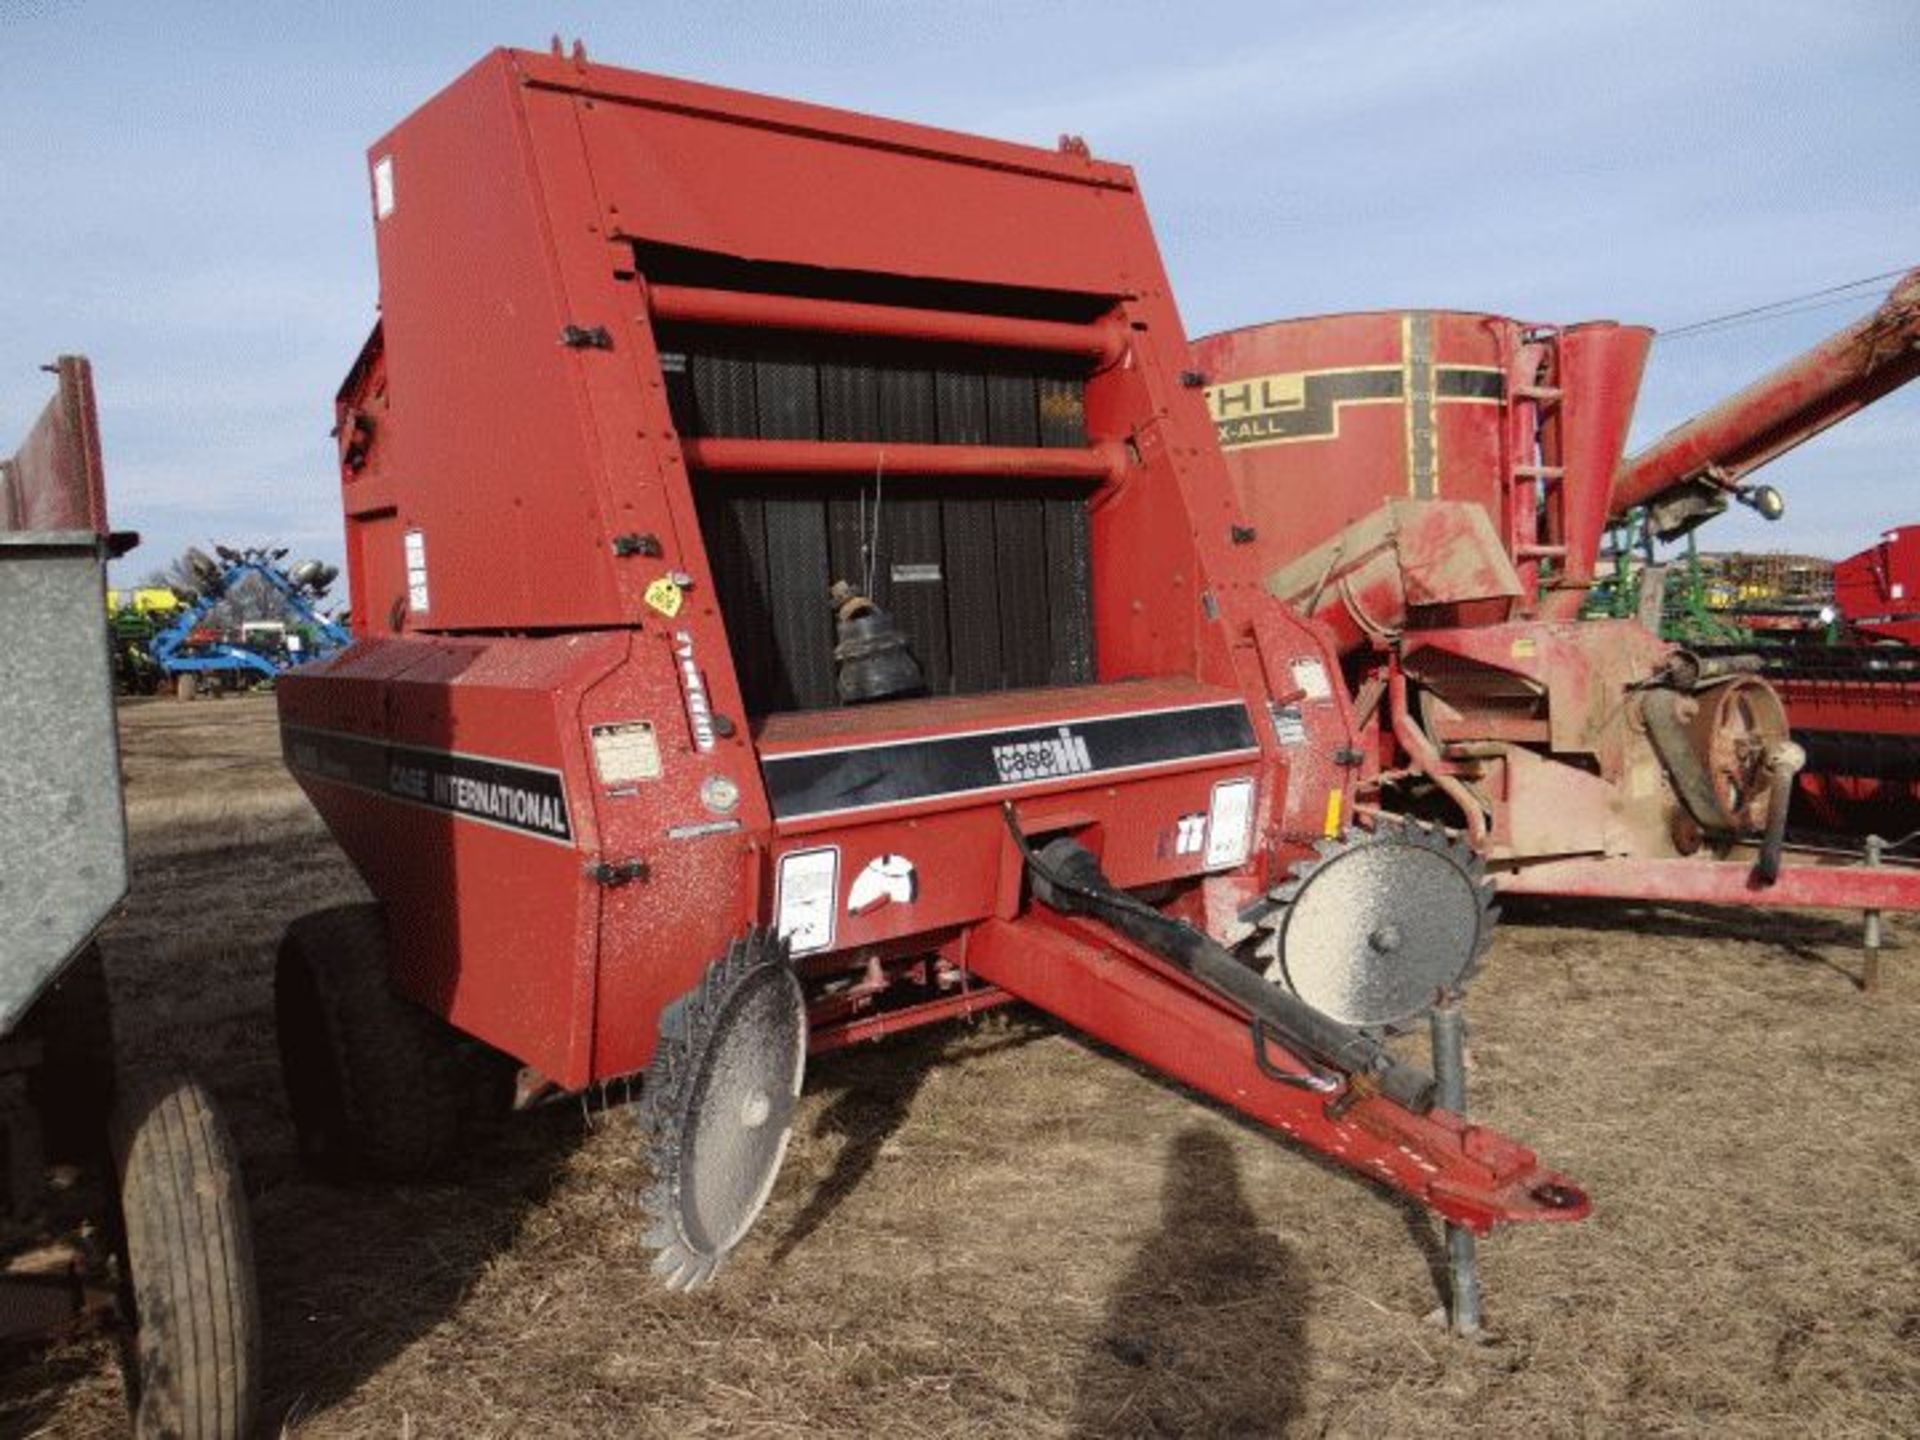 Lot # 2404 Case IH 8465 Round Baler 540 PTO, Automatic Baler, Monitor in the Shed - Image 2 of 3